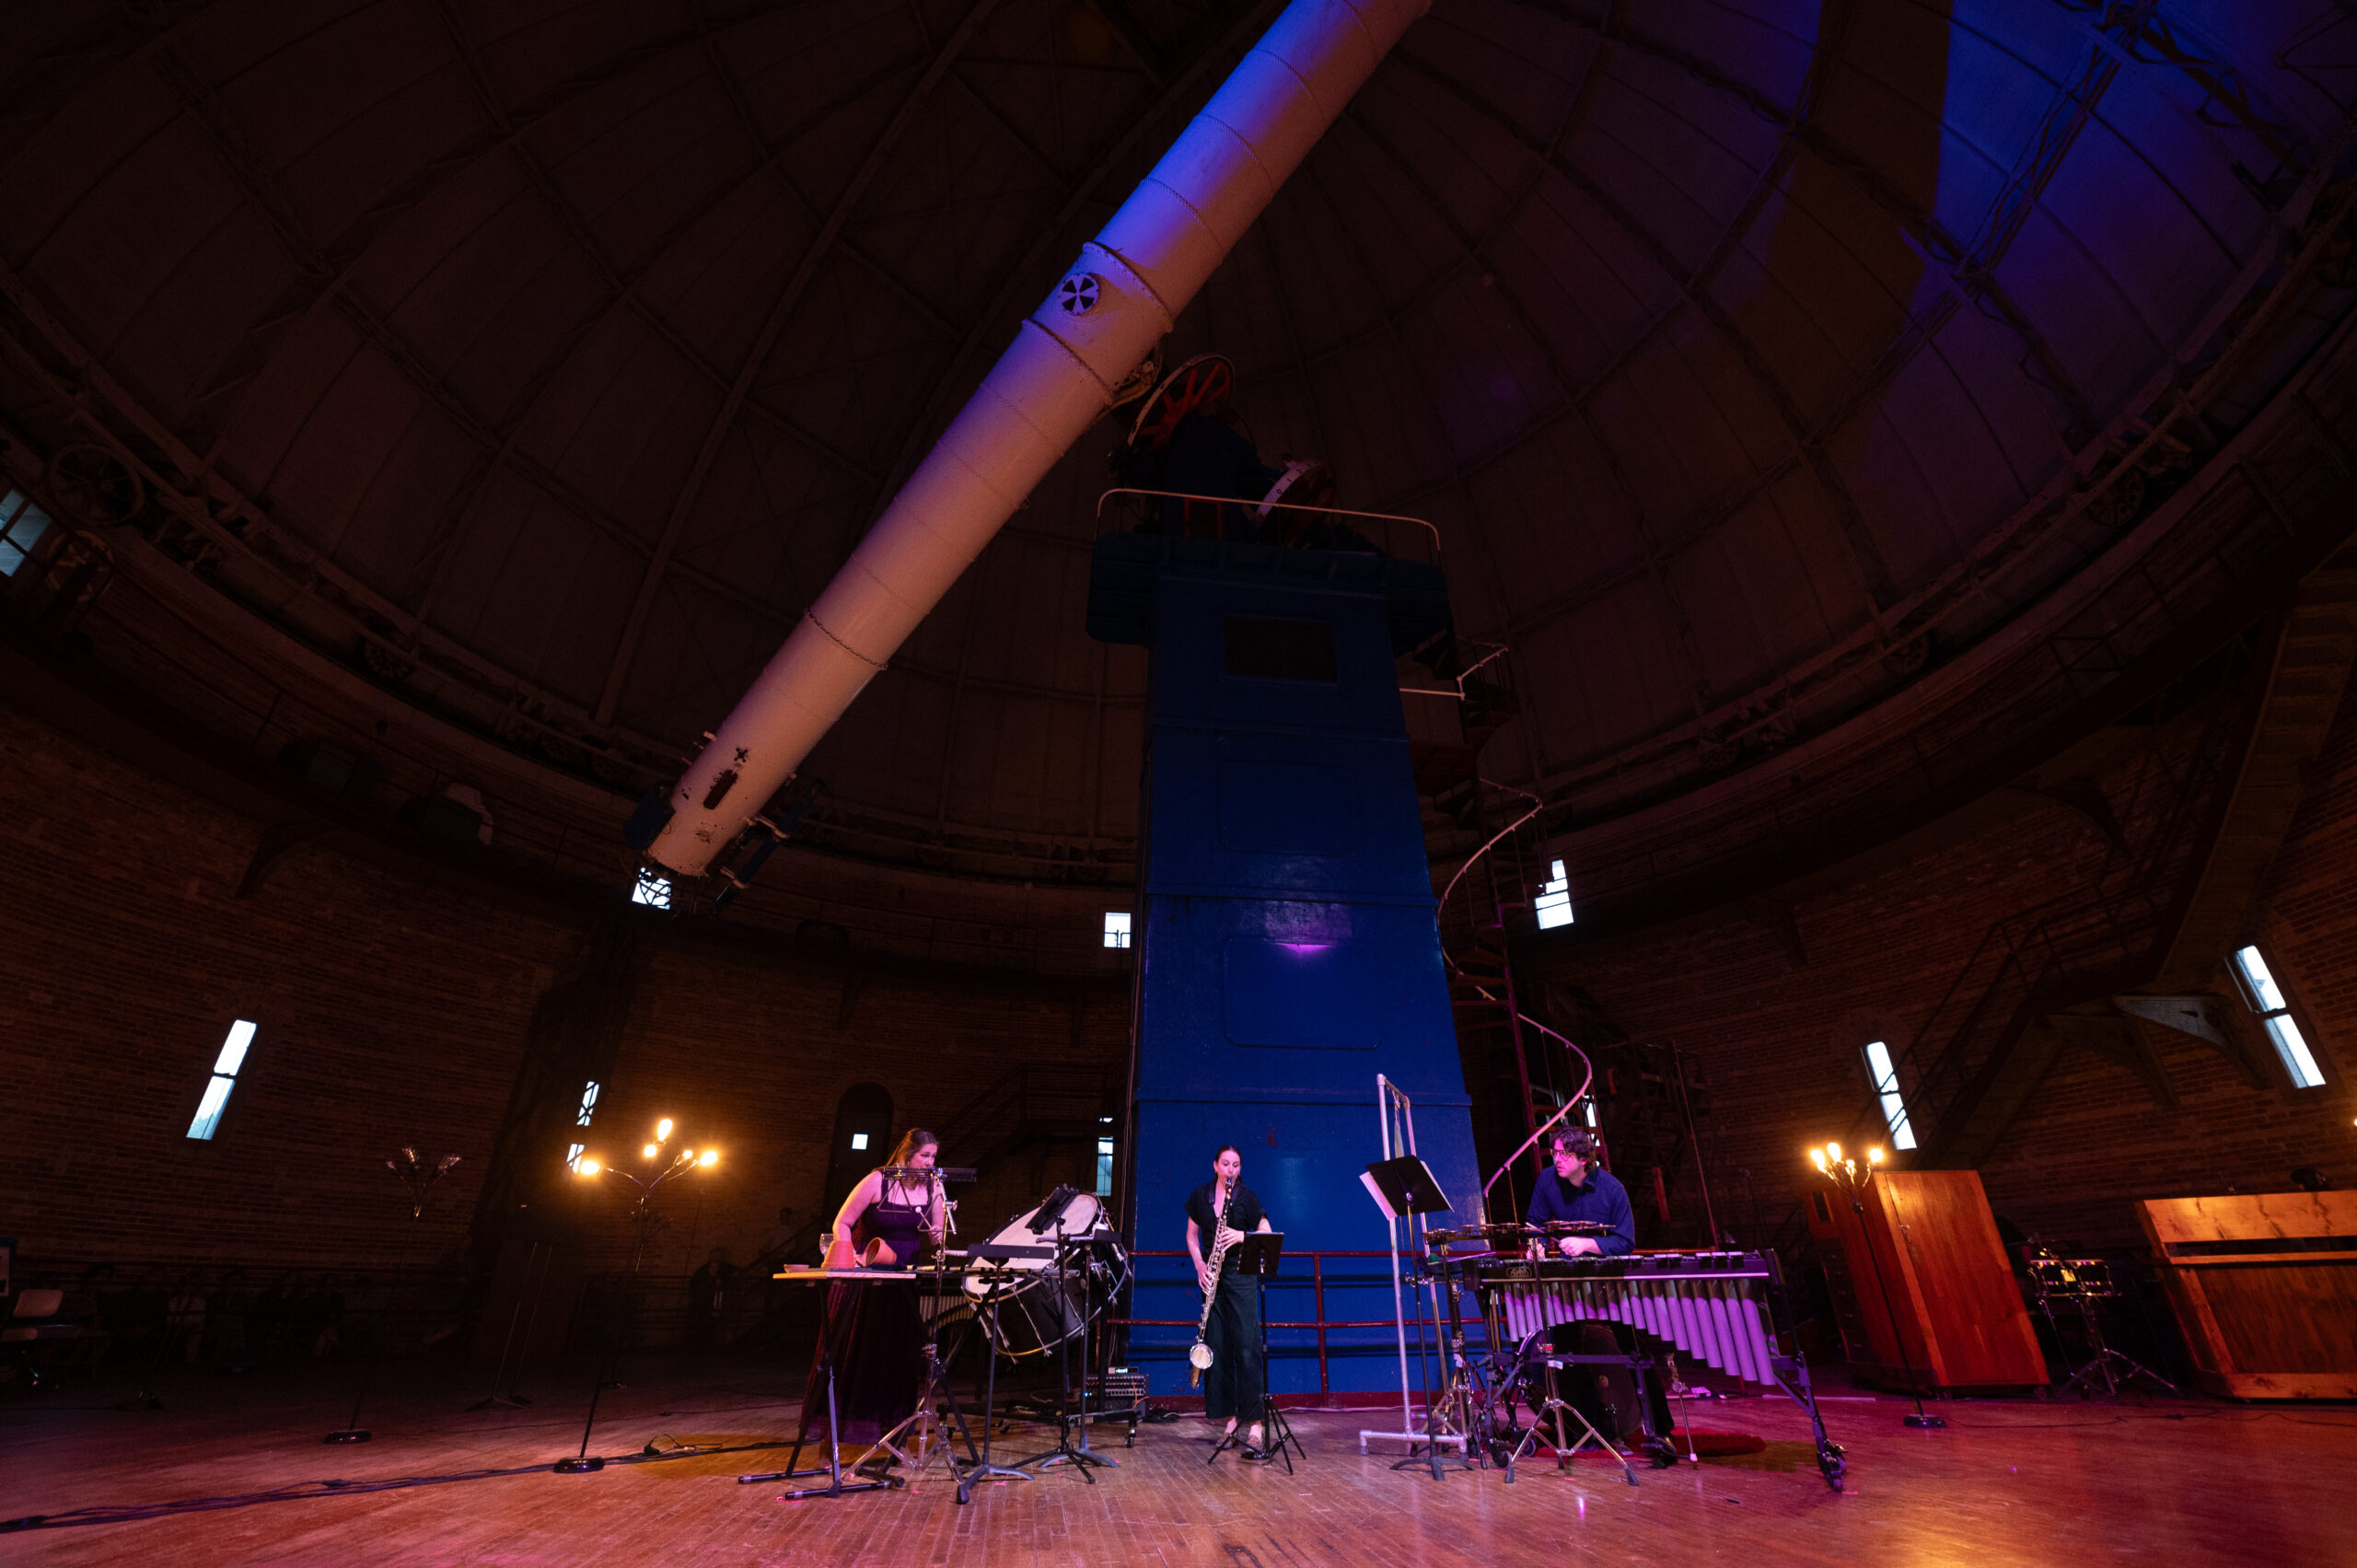 Three musicians with various instruments perform under a large refracting telescope. The observatory room is dimly lit.